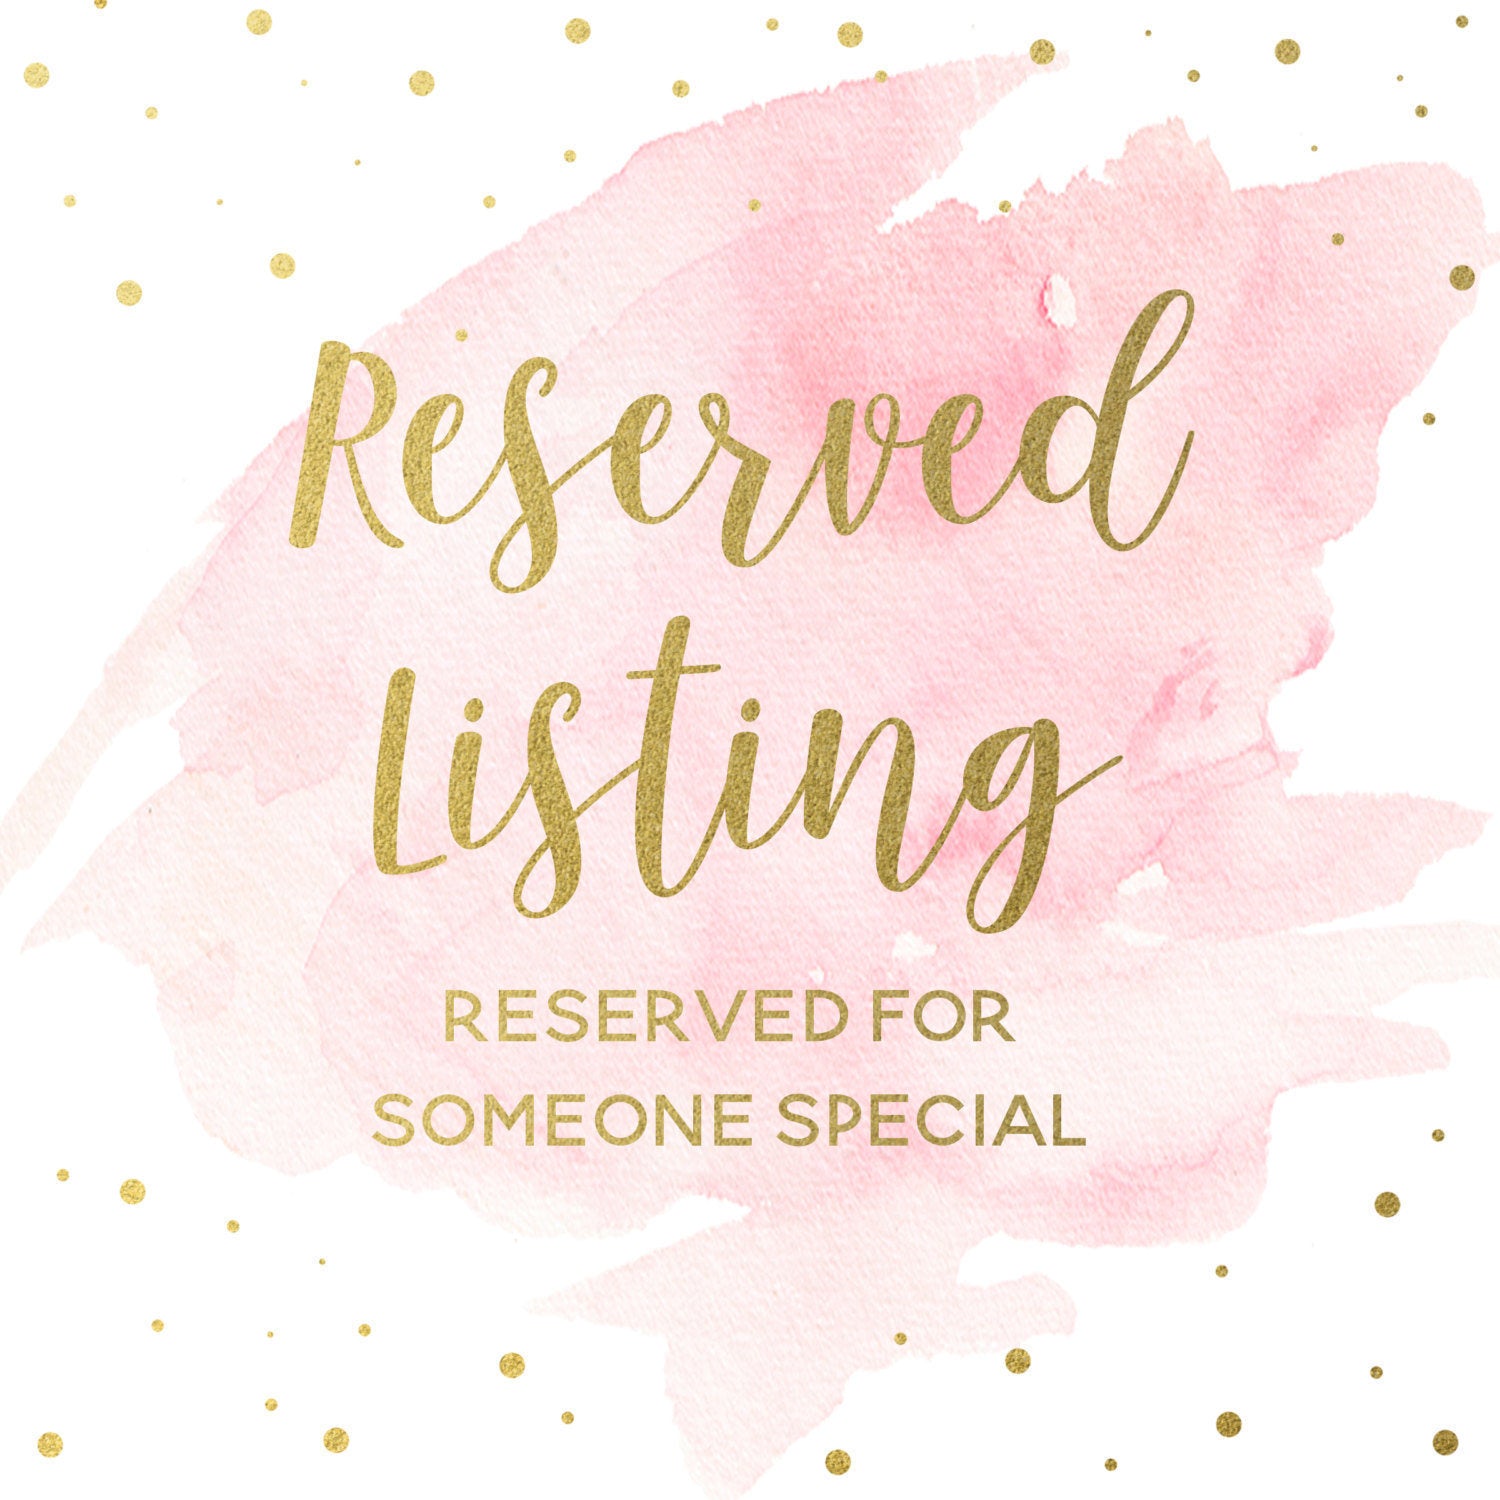 Reserved Listing - Kayla T